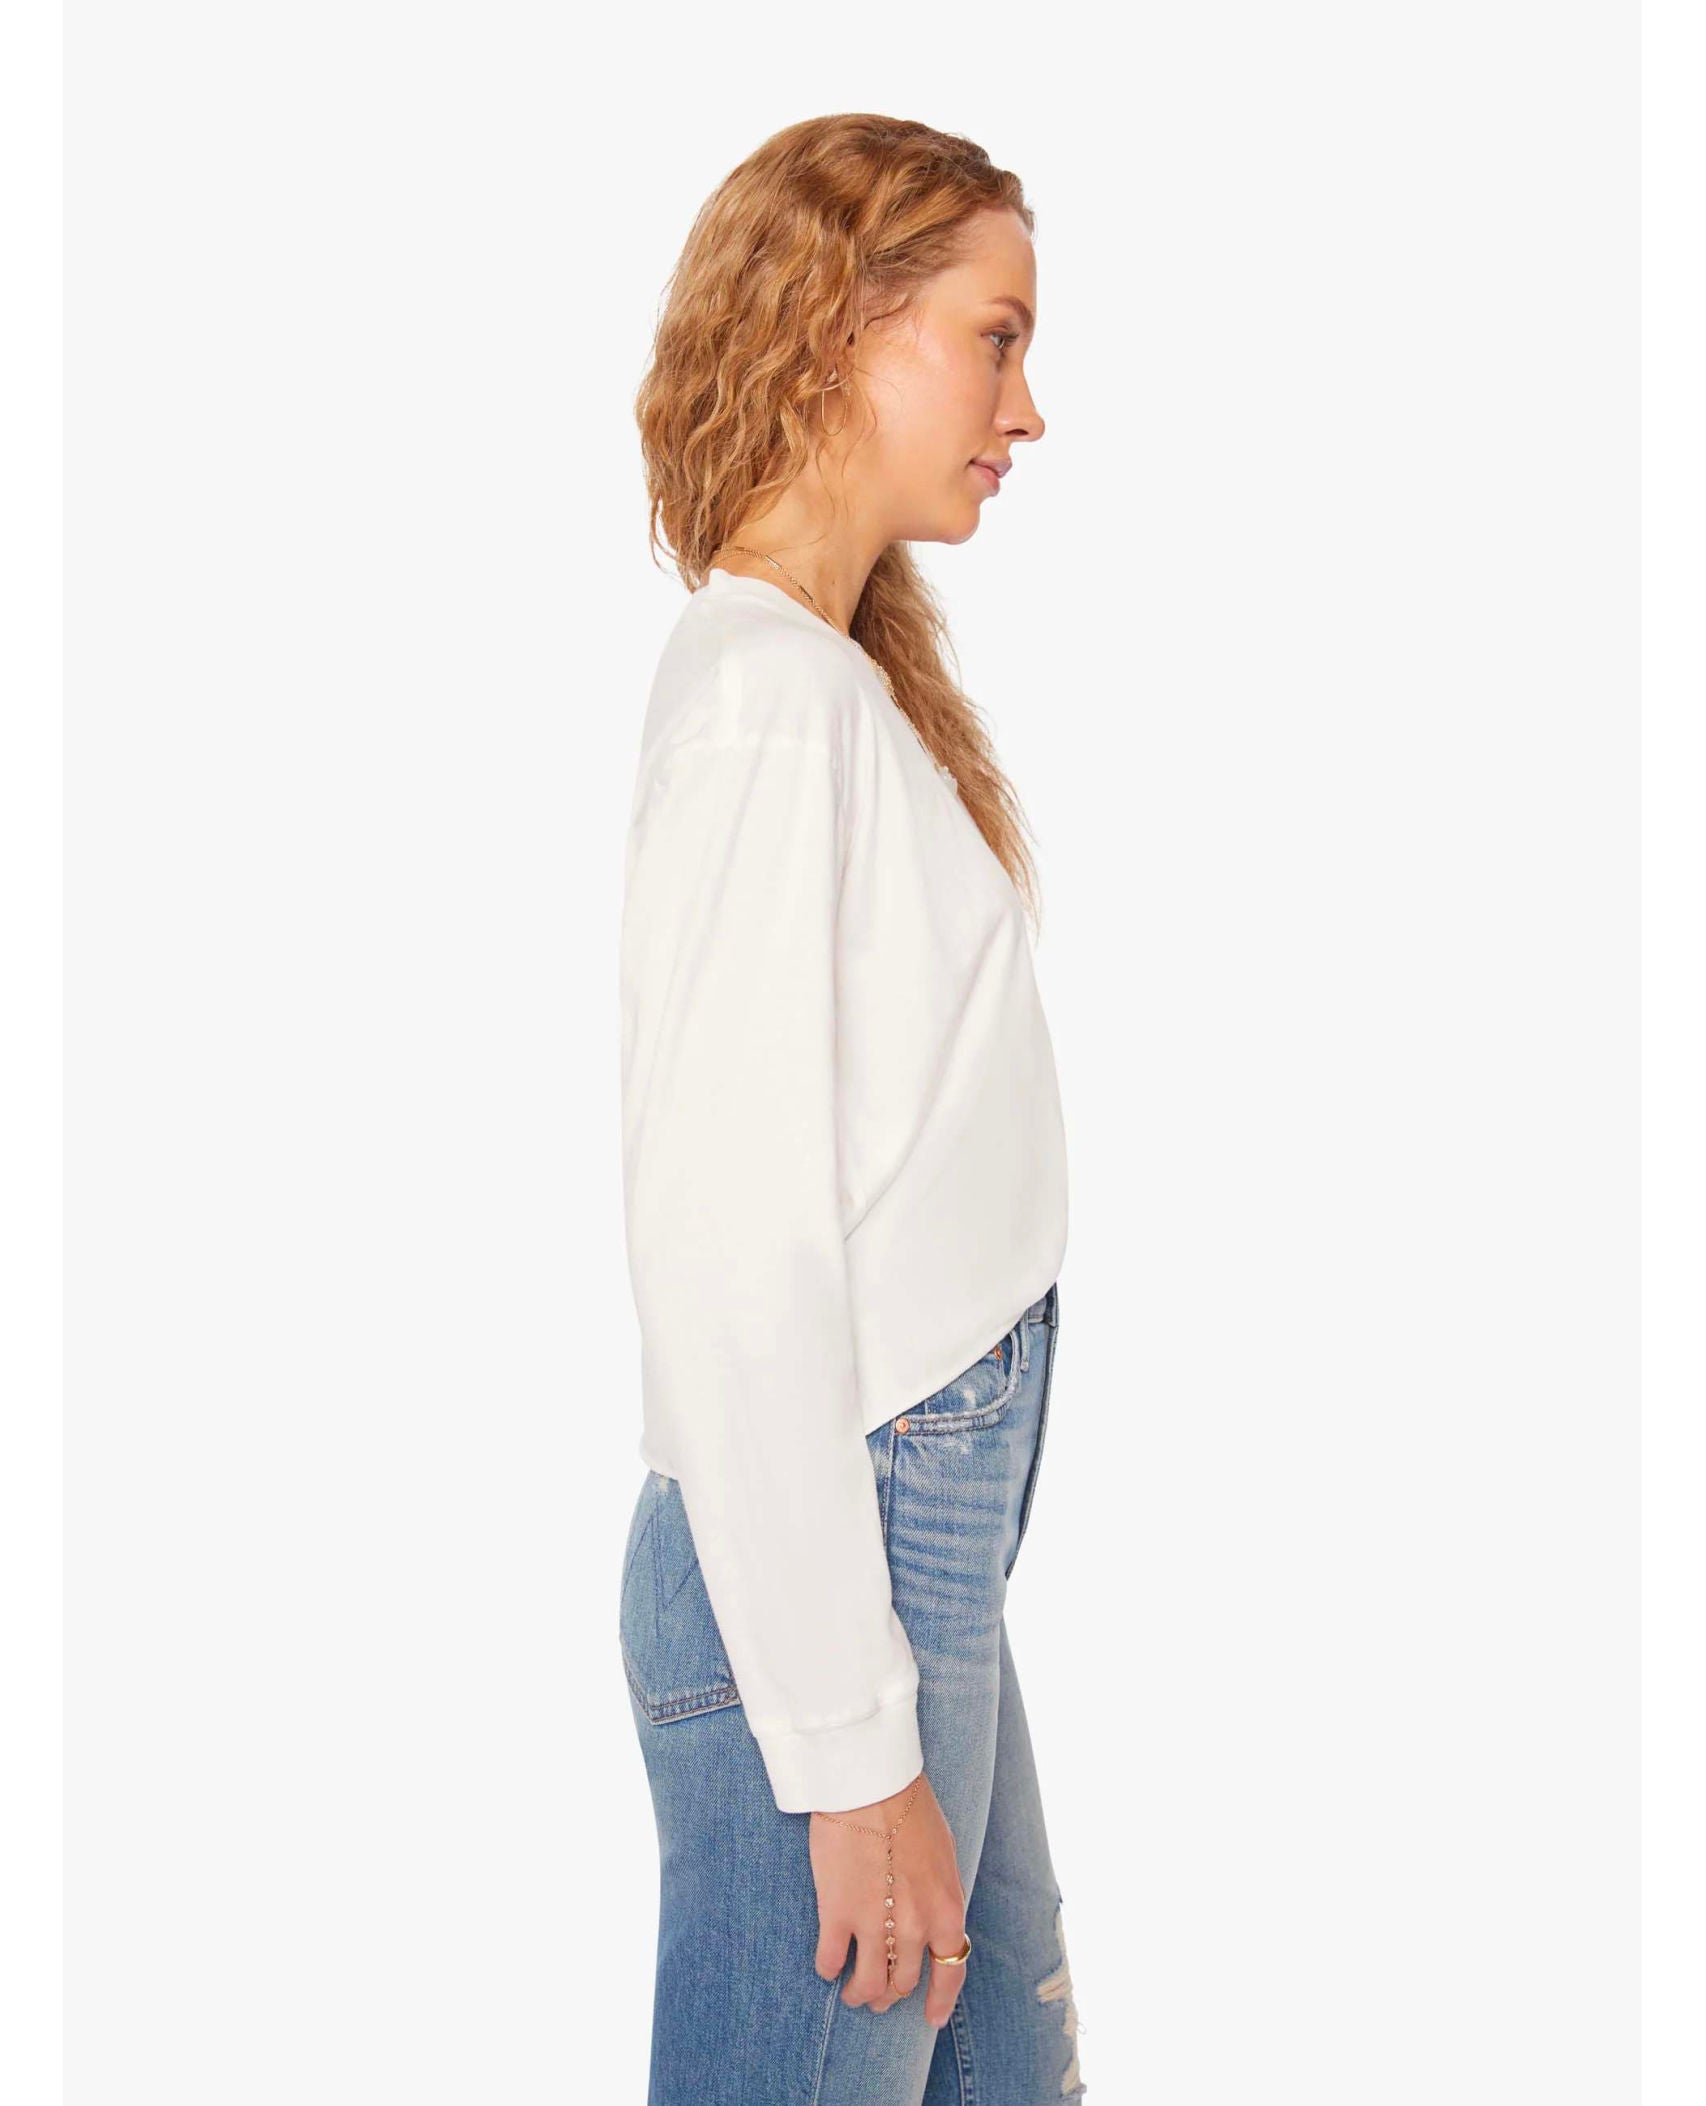 The Long Sleeve Slouchy Cut Off White